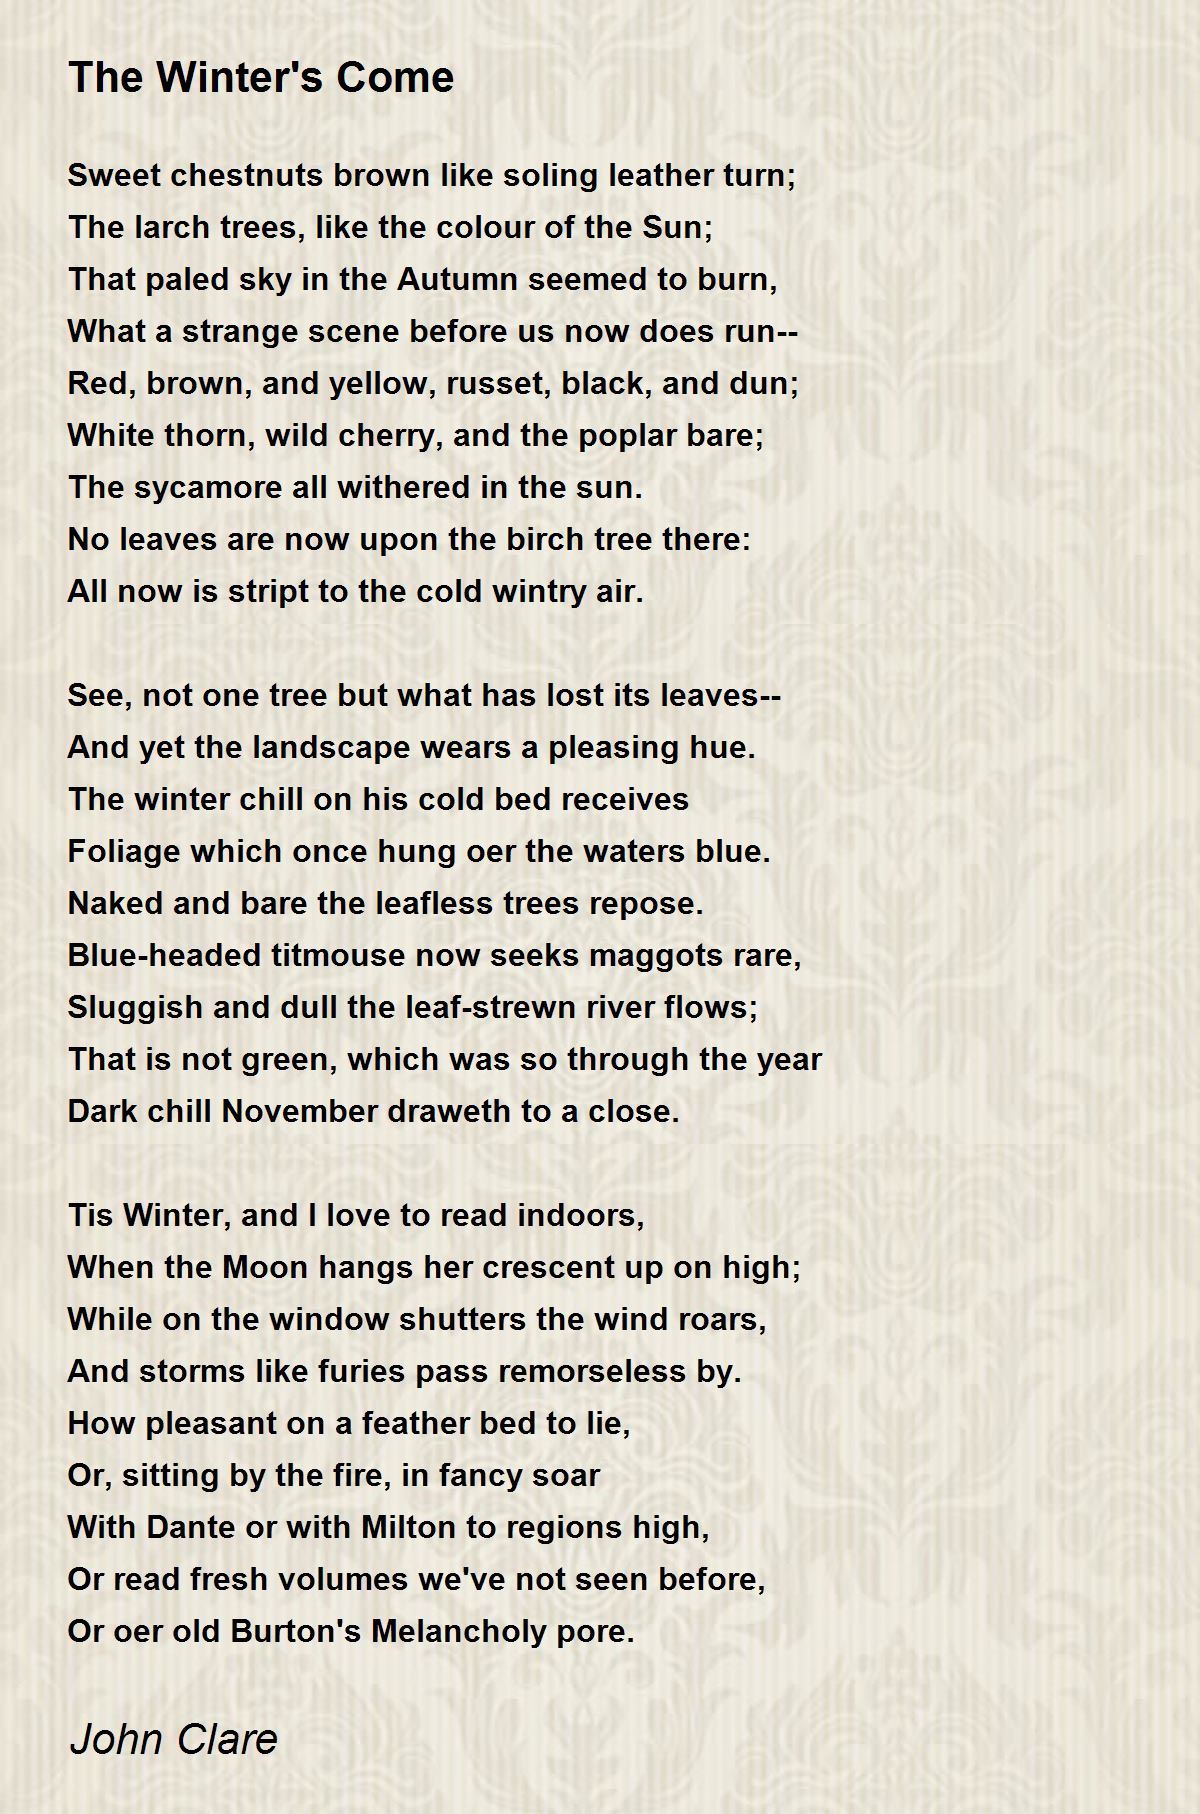 The Winter's Come Poem by John Clare - Poem Hunter